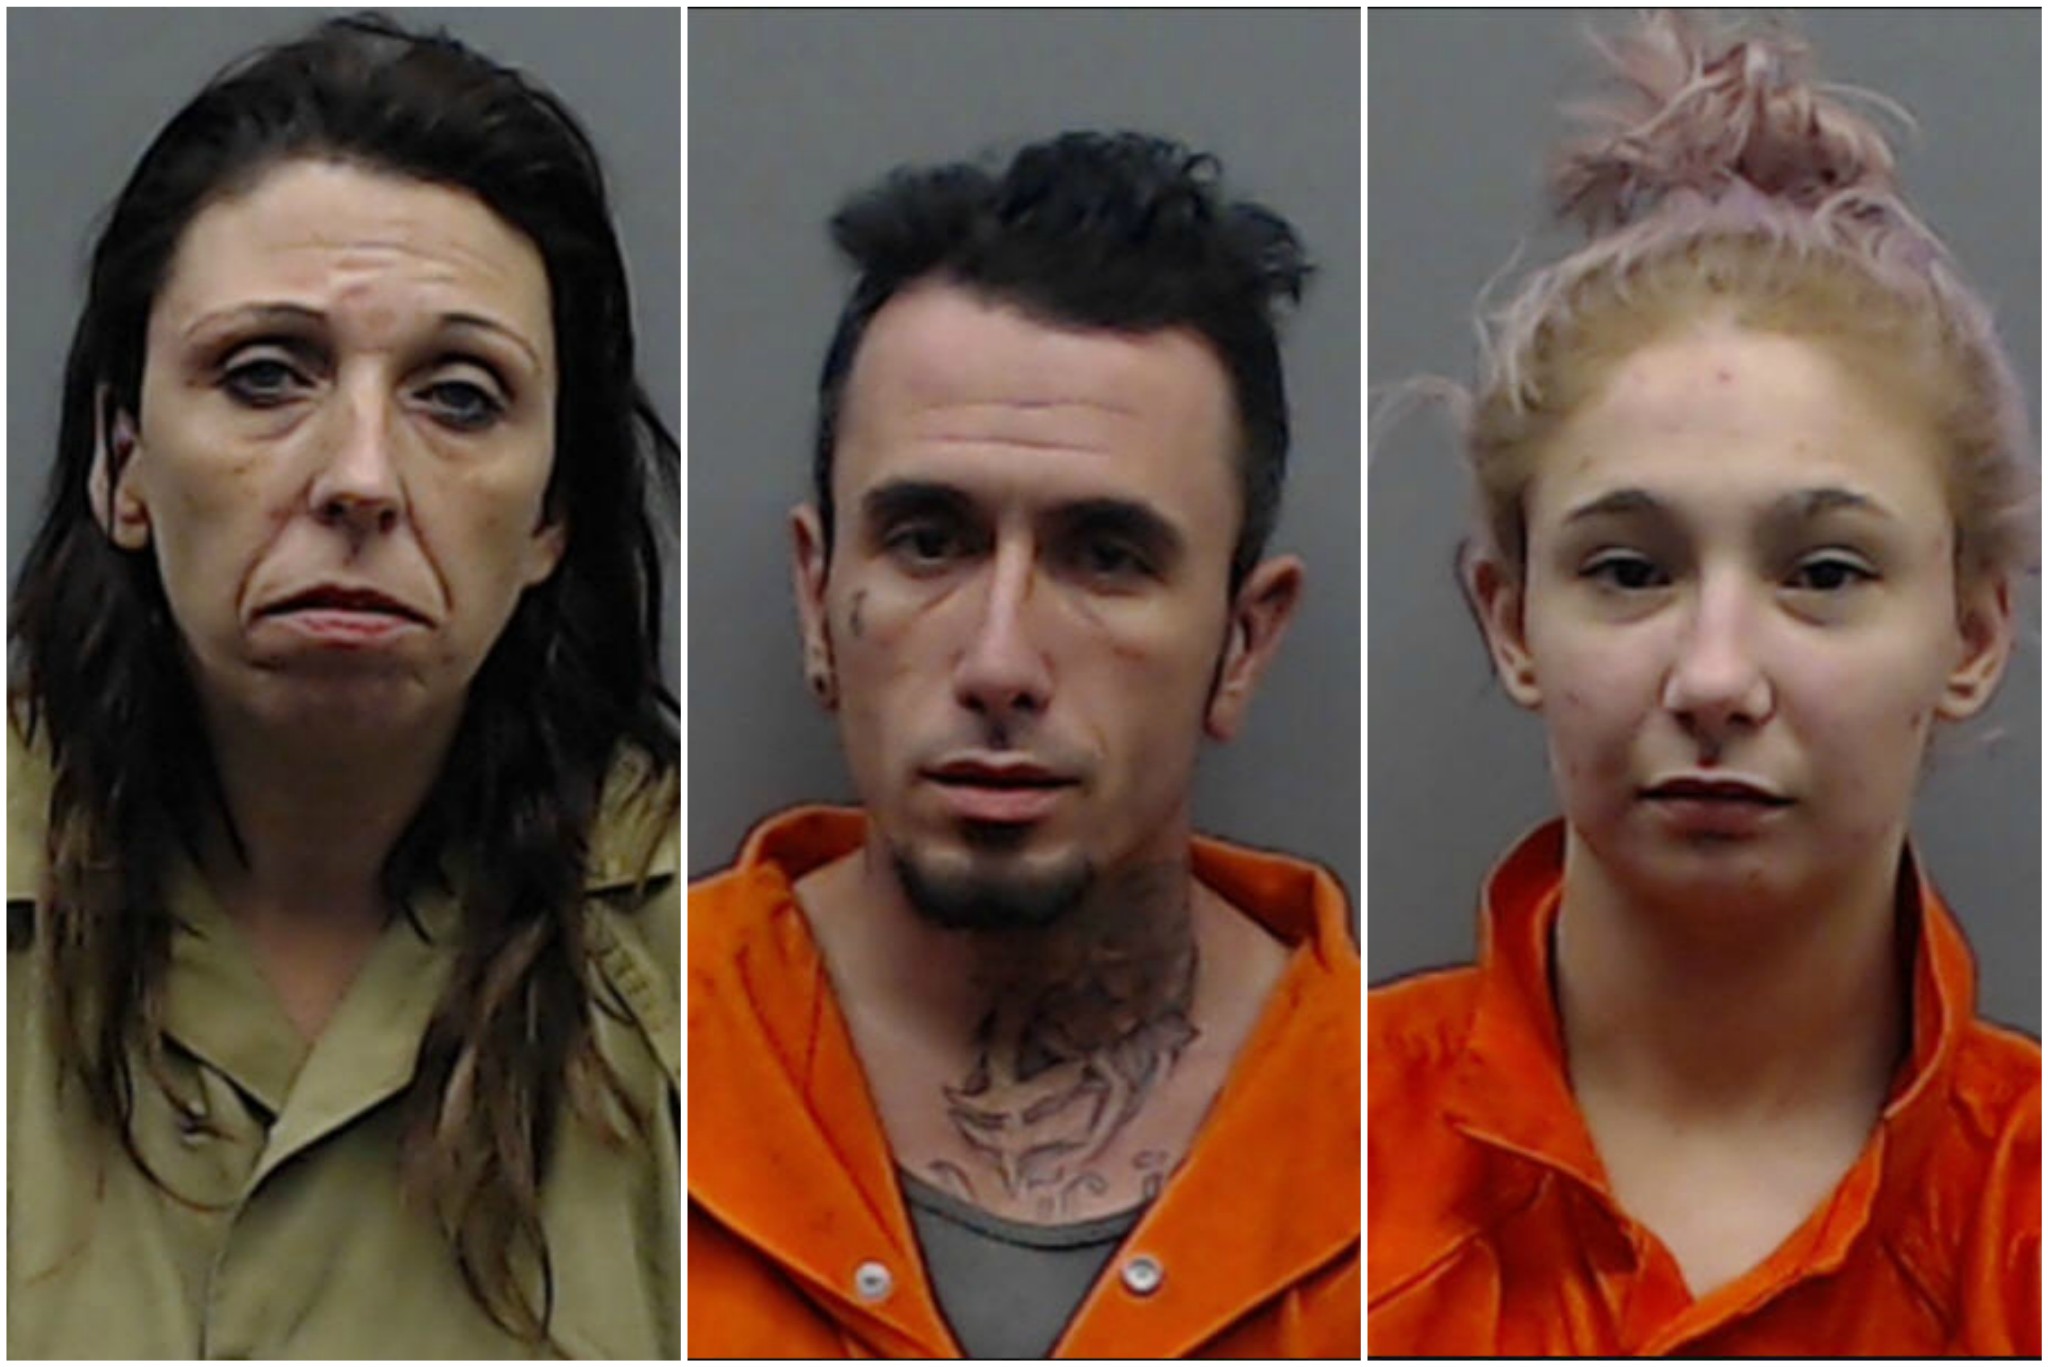 Police: Suspects in East Texas crime ring stole vehicles, possessed meth and cocaine ...